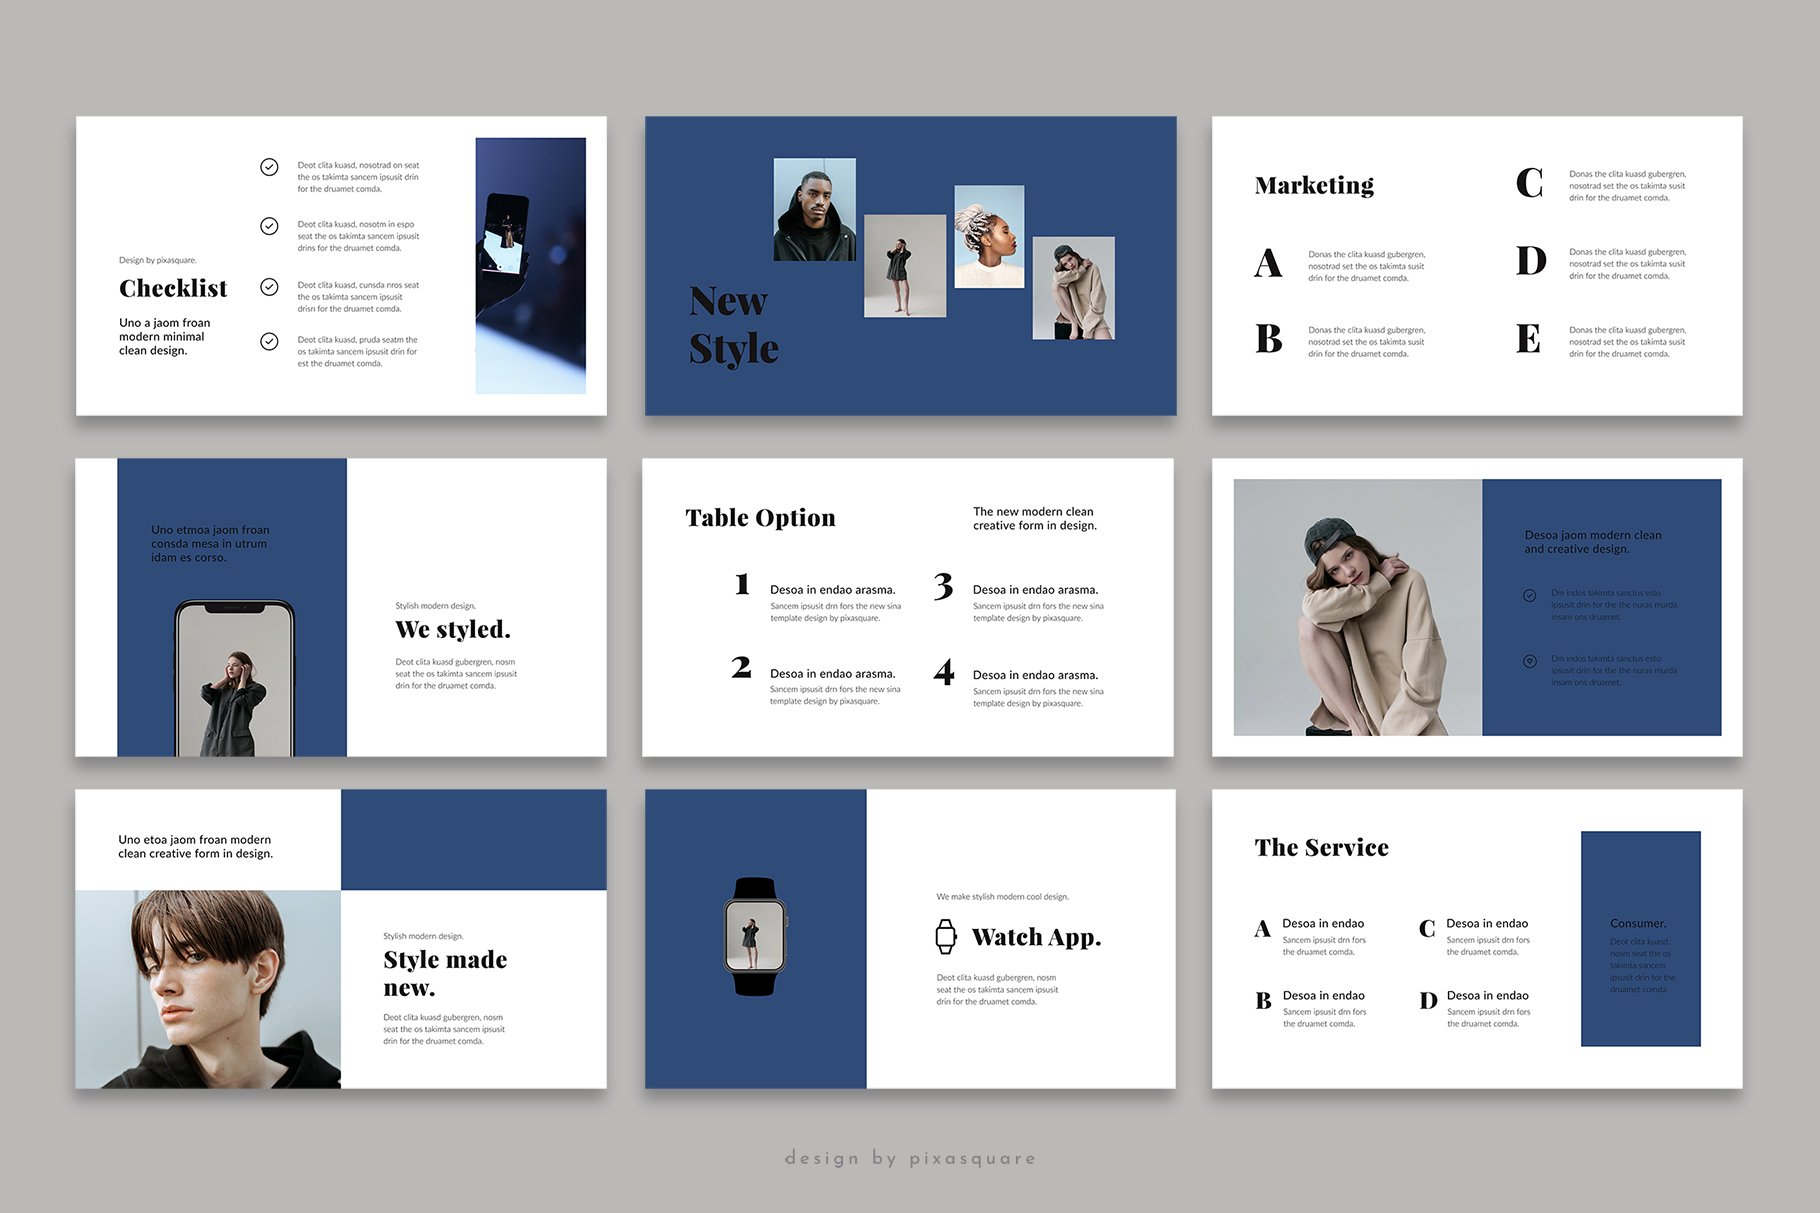 Minimalistic template with warm blue elements.